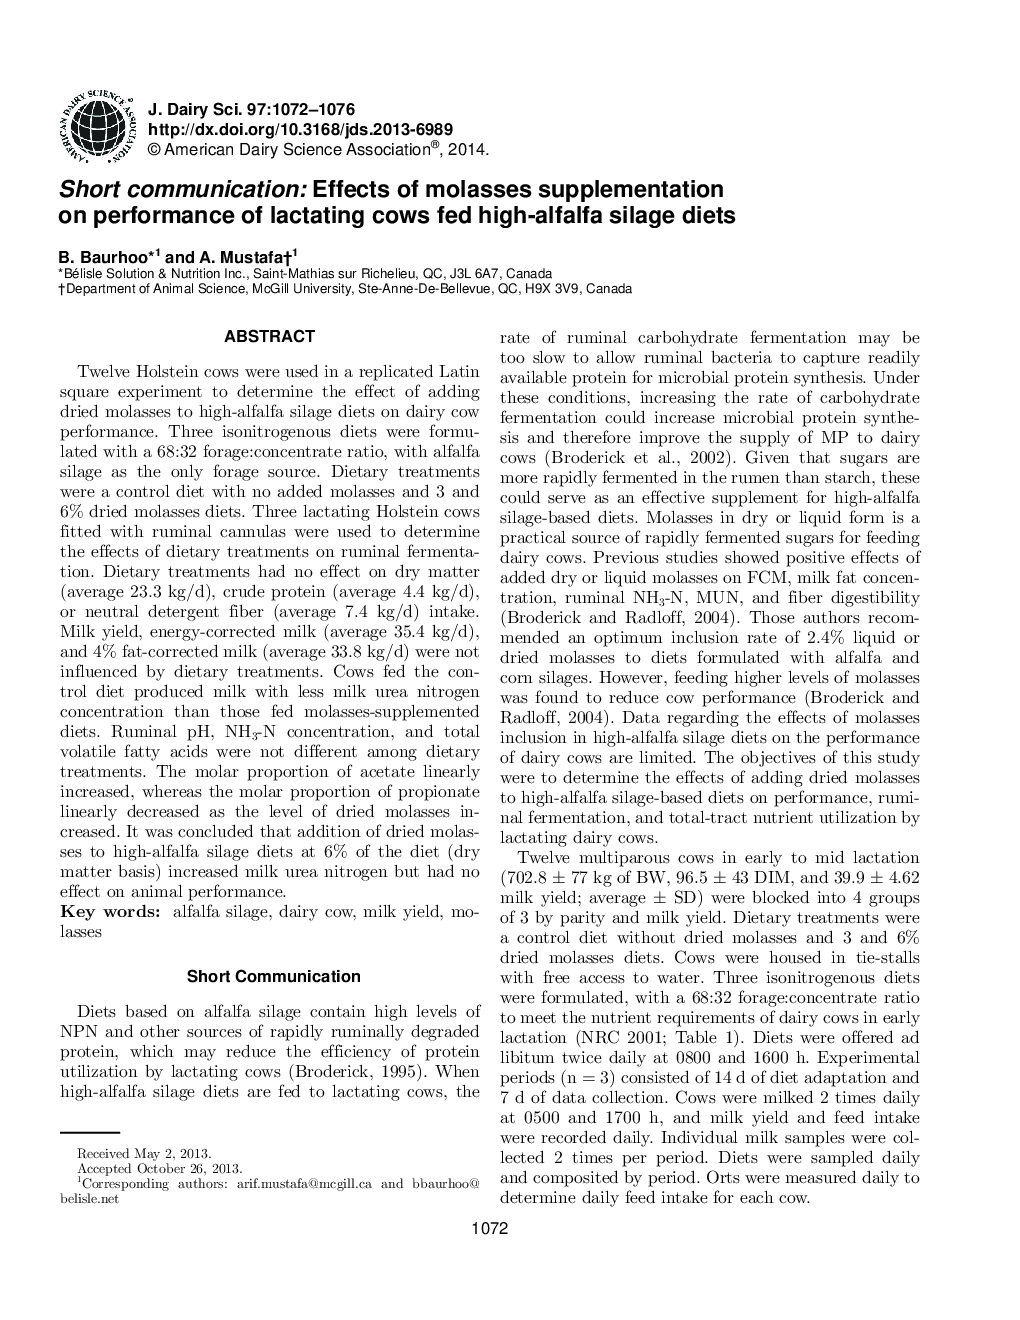 Short communication: Effects of molasses supplementation on performance of lactating cows fed high-alfalfa silage diets